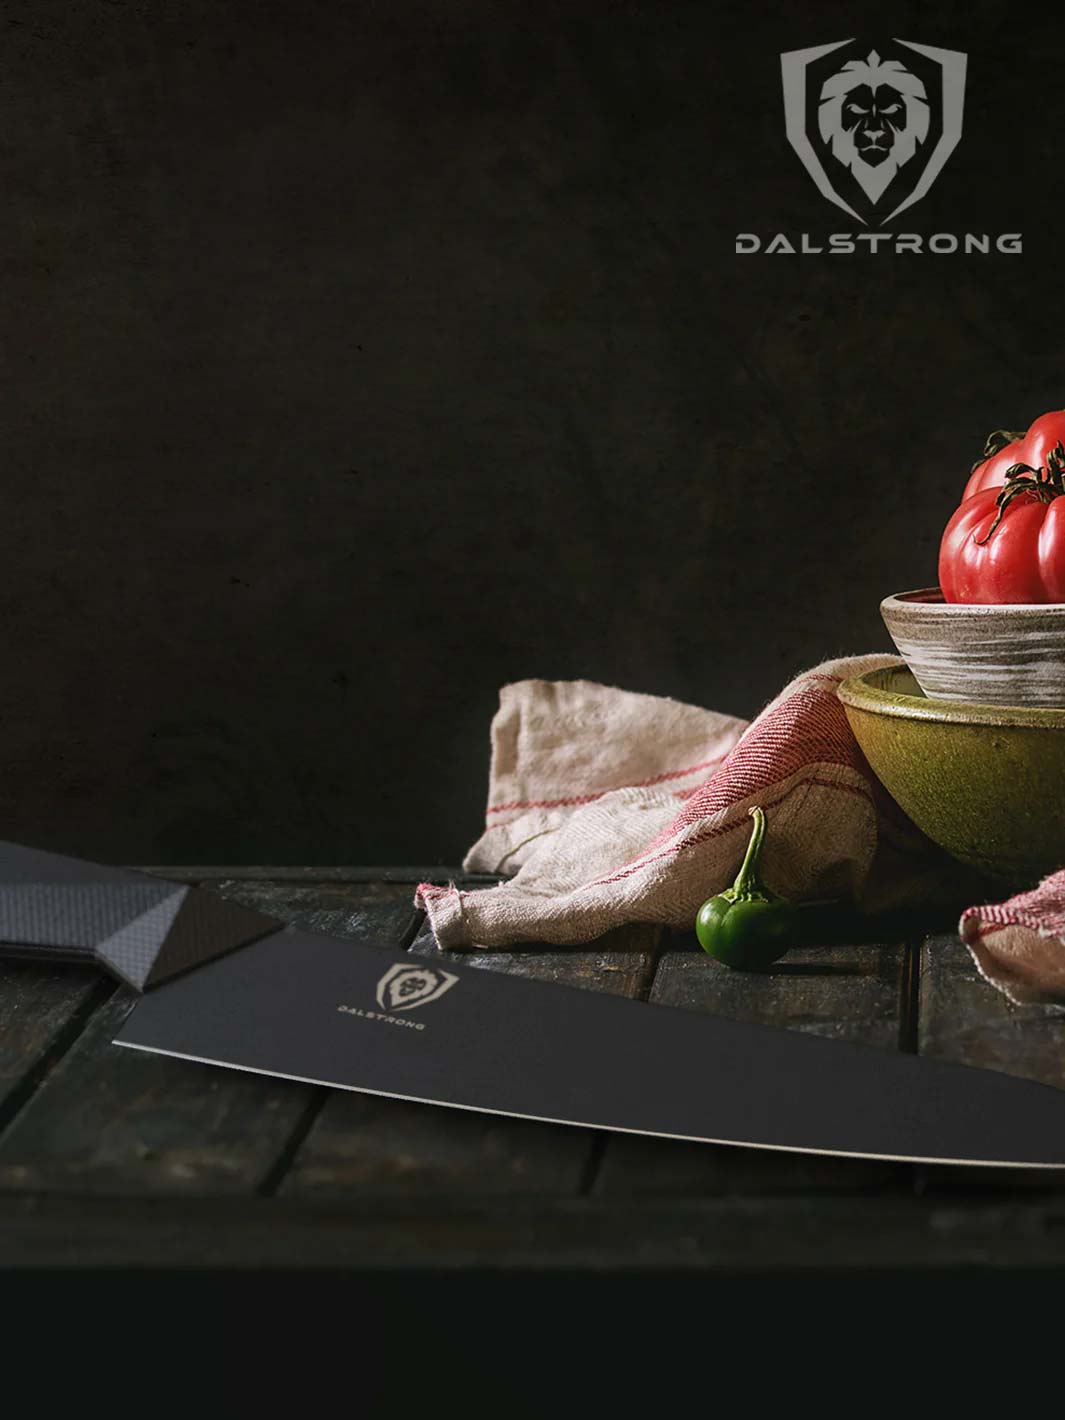 Dalstrong shadow black series 8 inch chef knife on a wooden table.